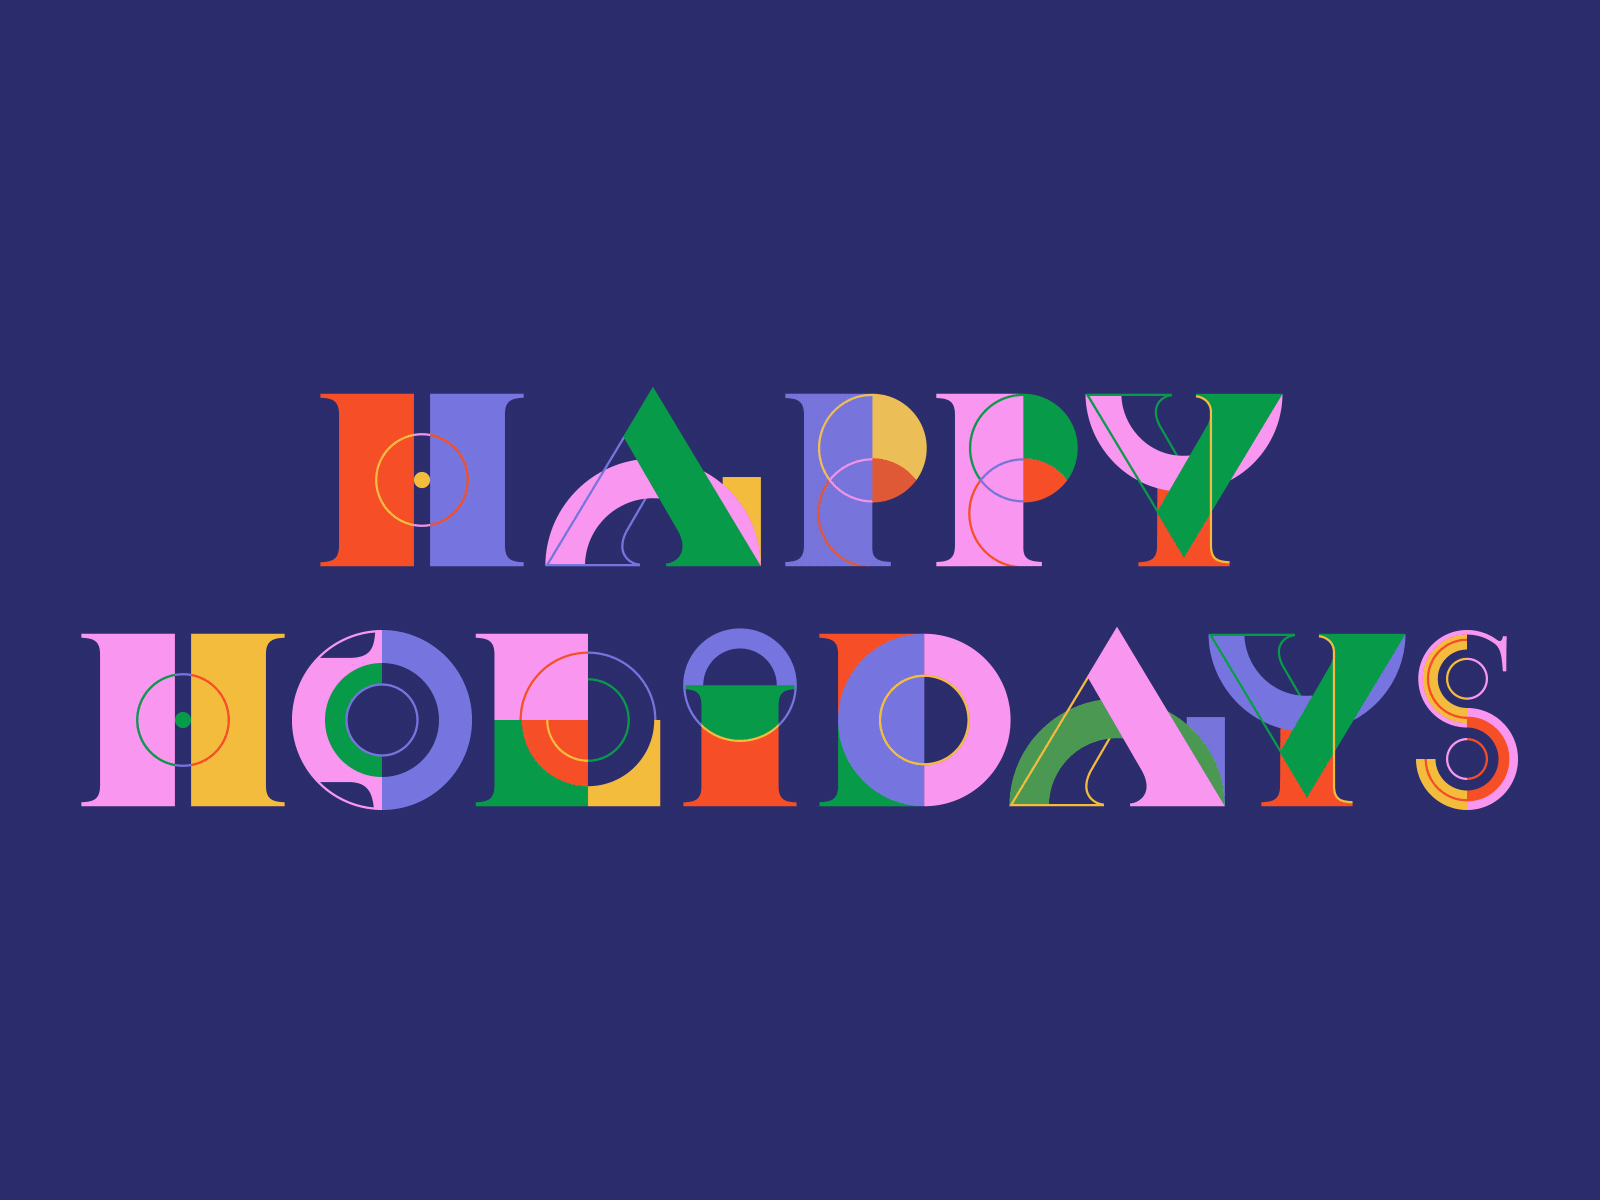 Happy Holidays Vicente by Animography on Dribbble